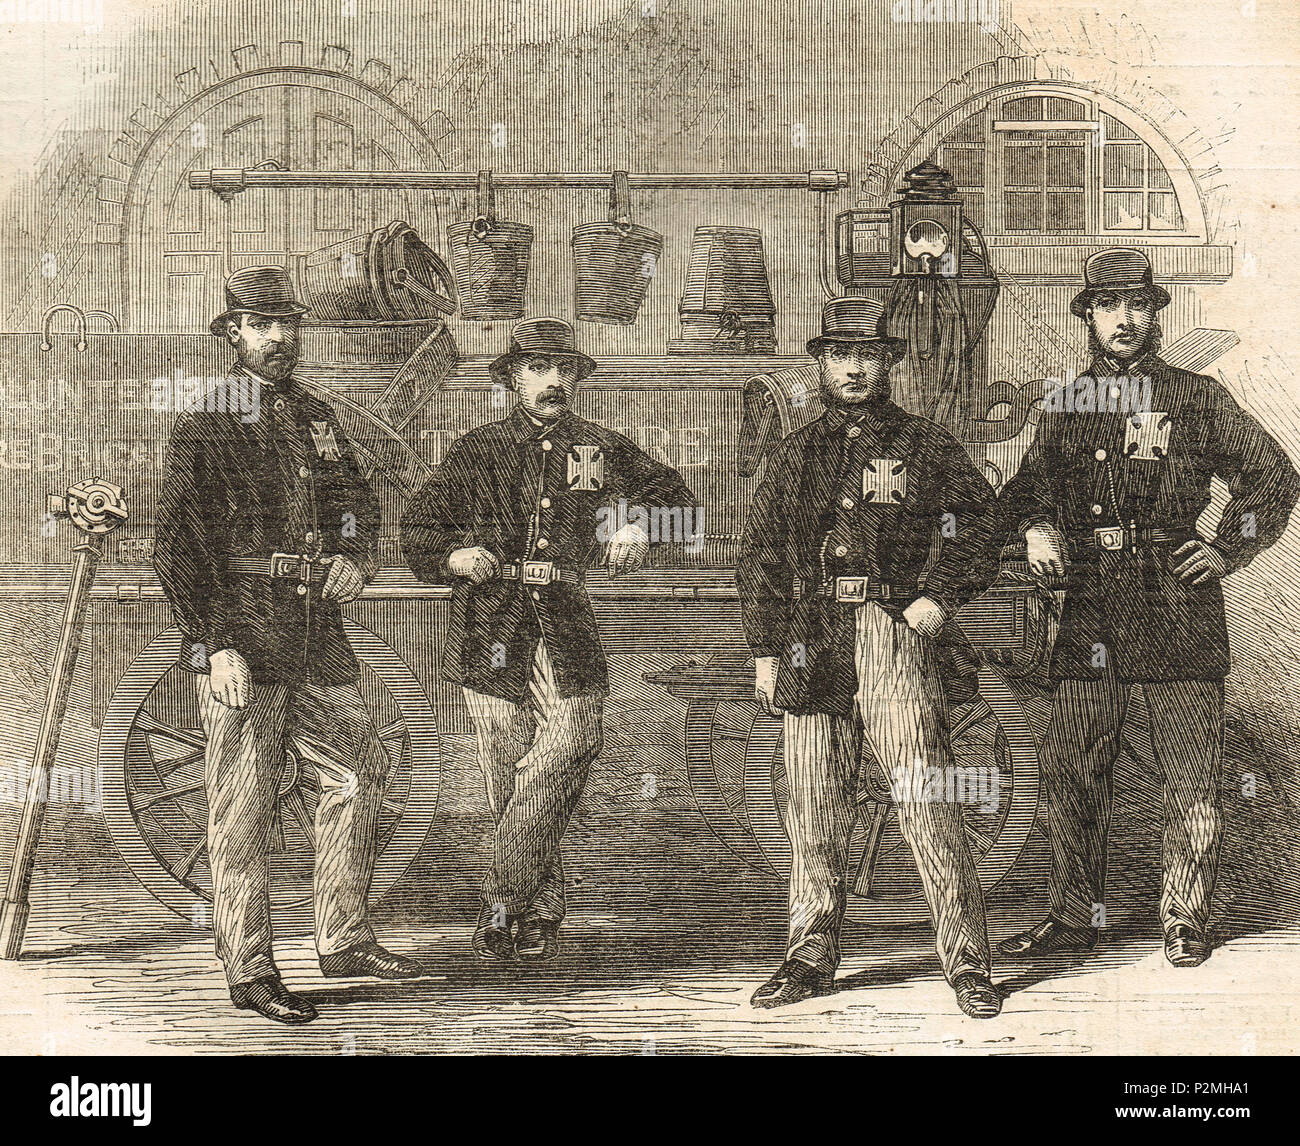 Members of the Coventry Volunteer Fire Brigade, 1862 Stock Photo